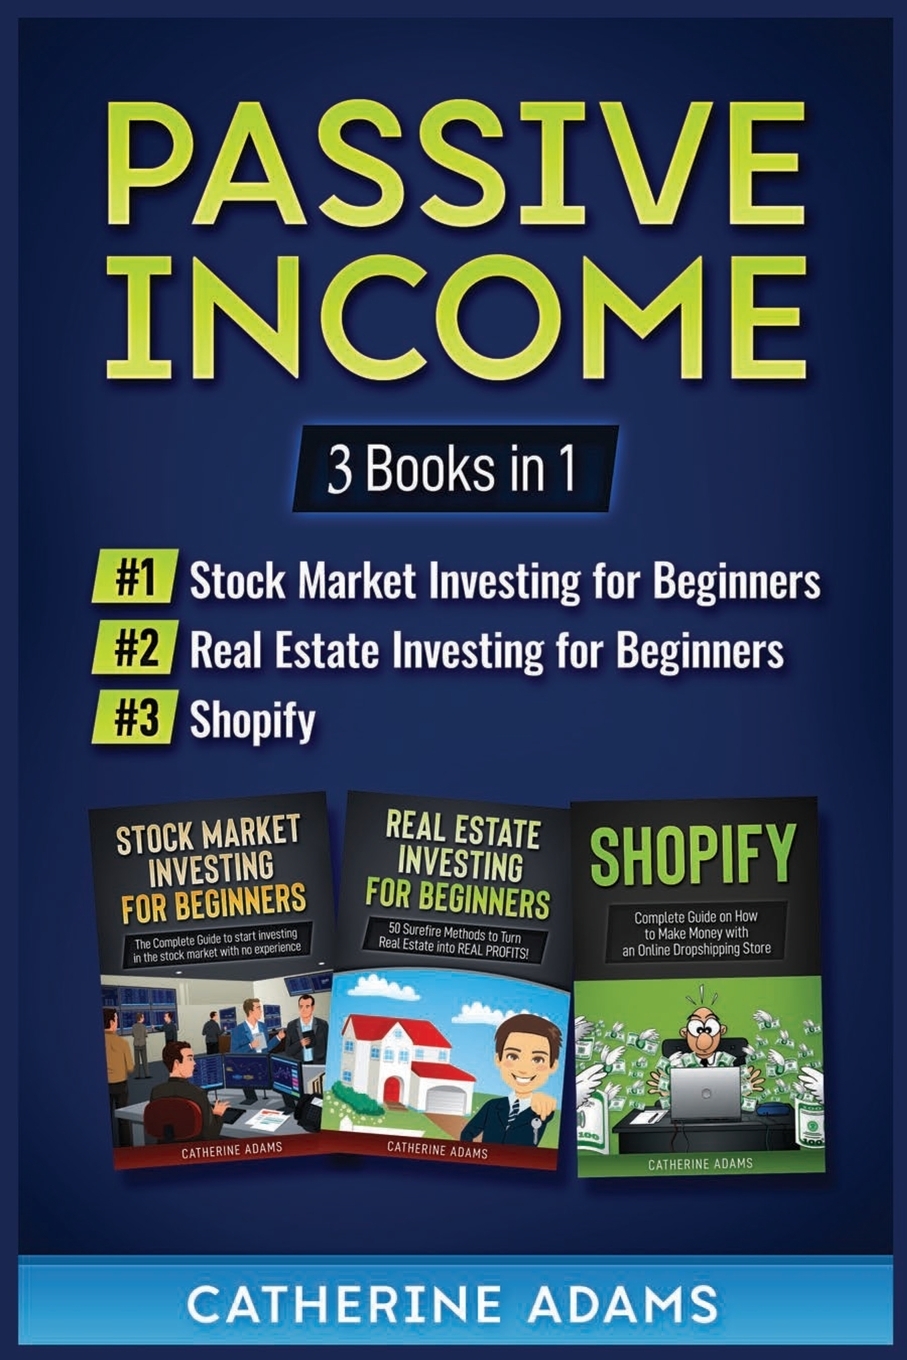 фото Passive Income. 3 Books in 1: Stock Market Investing for Beginners, Real Estate Investing for Beginners and Shopify